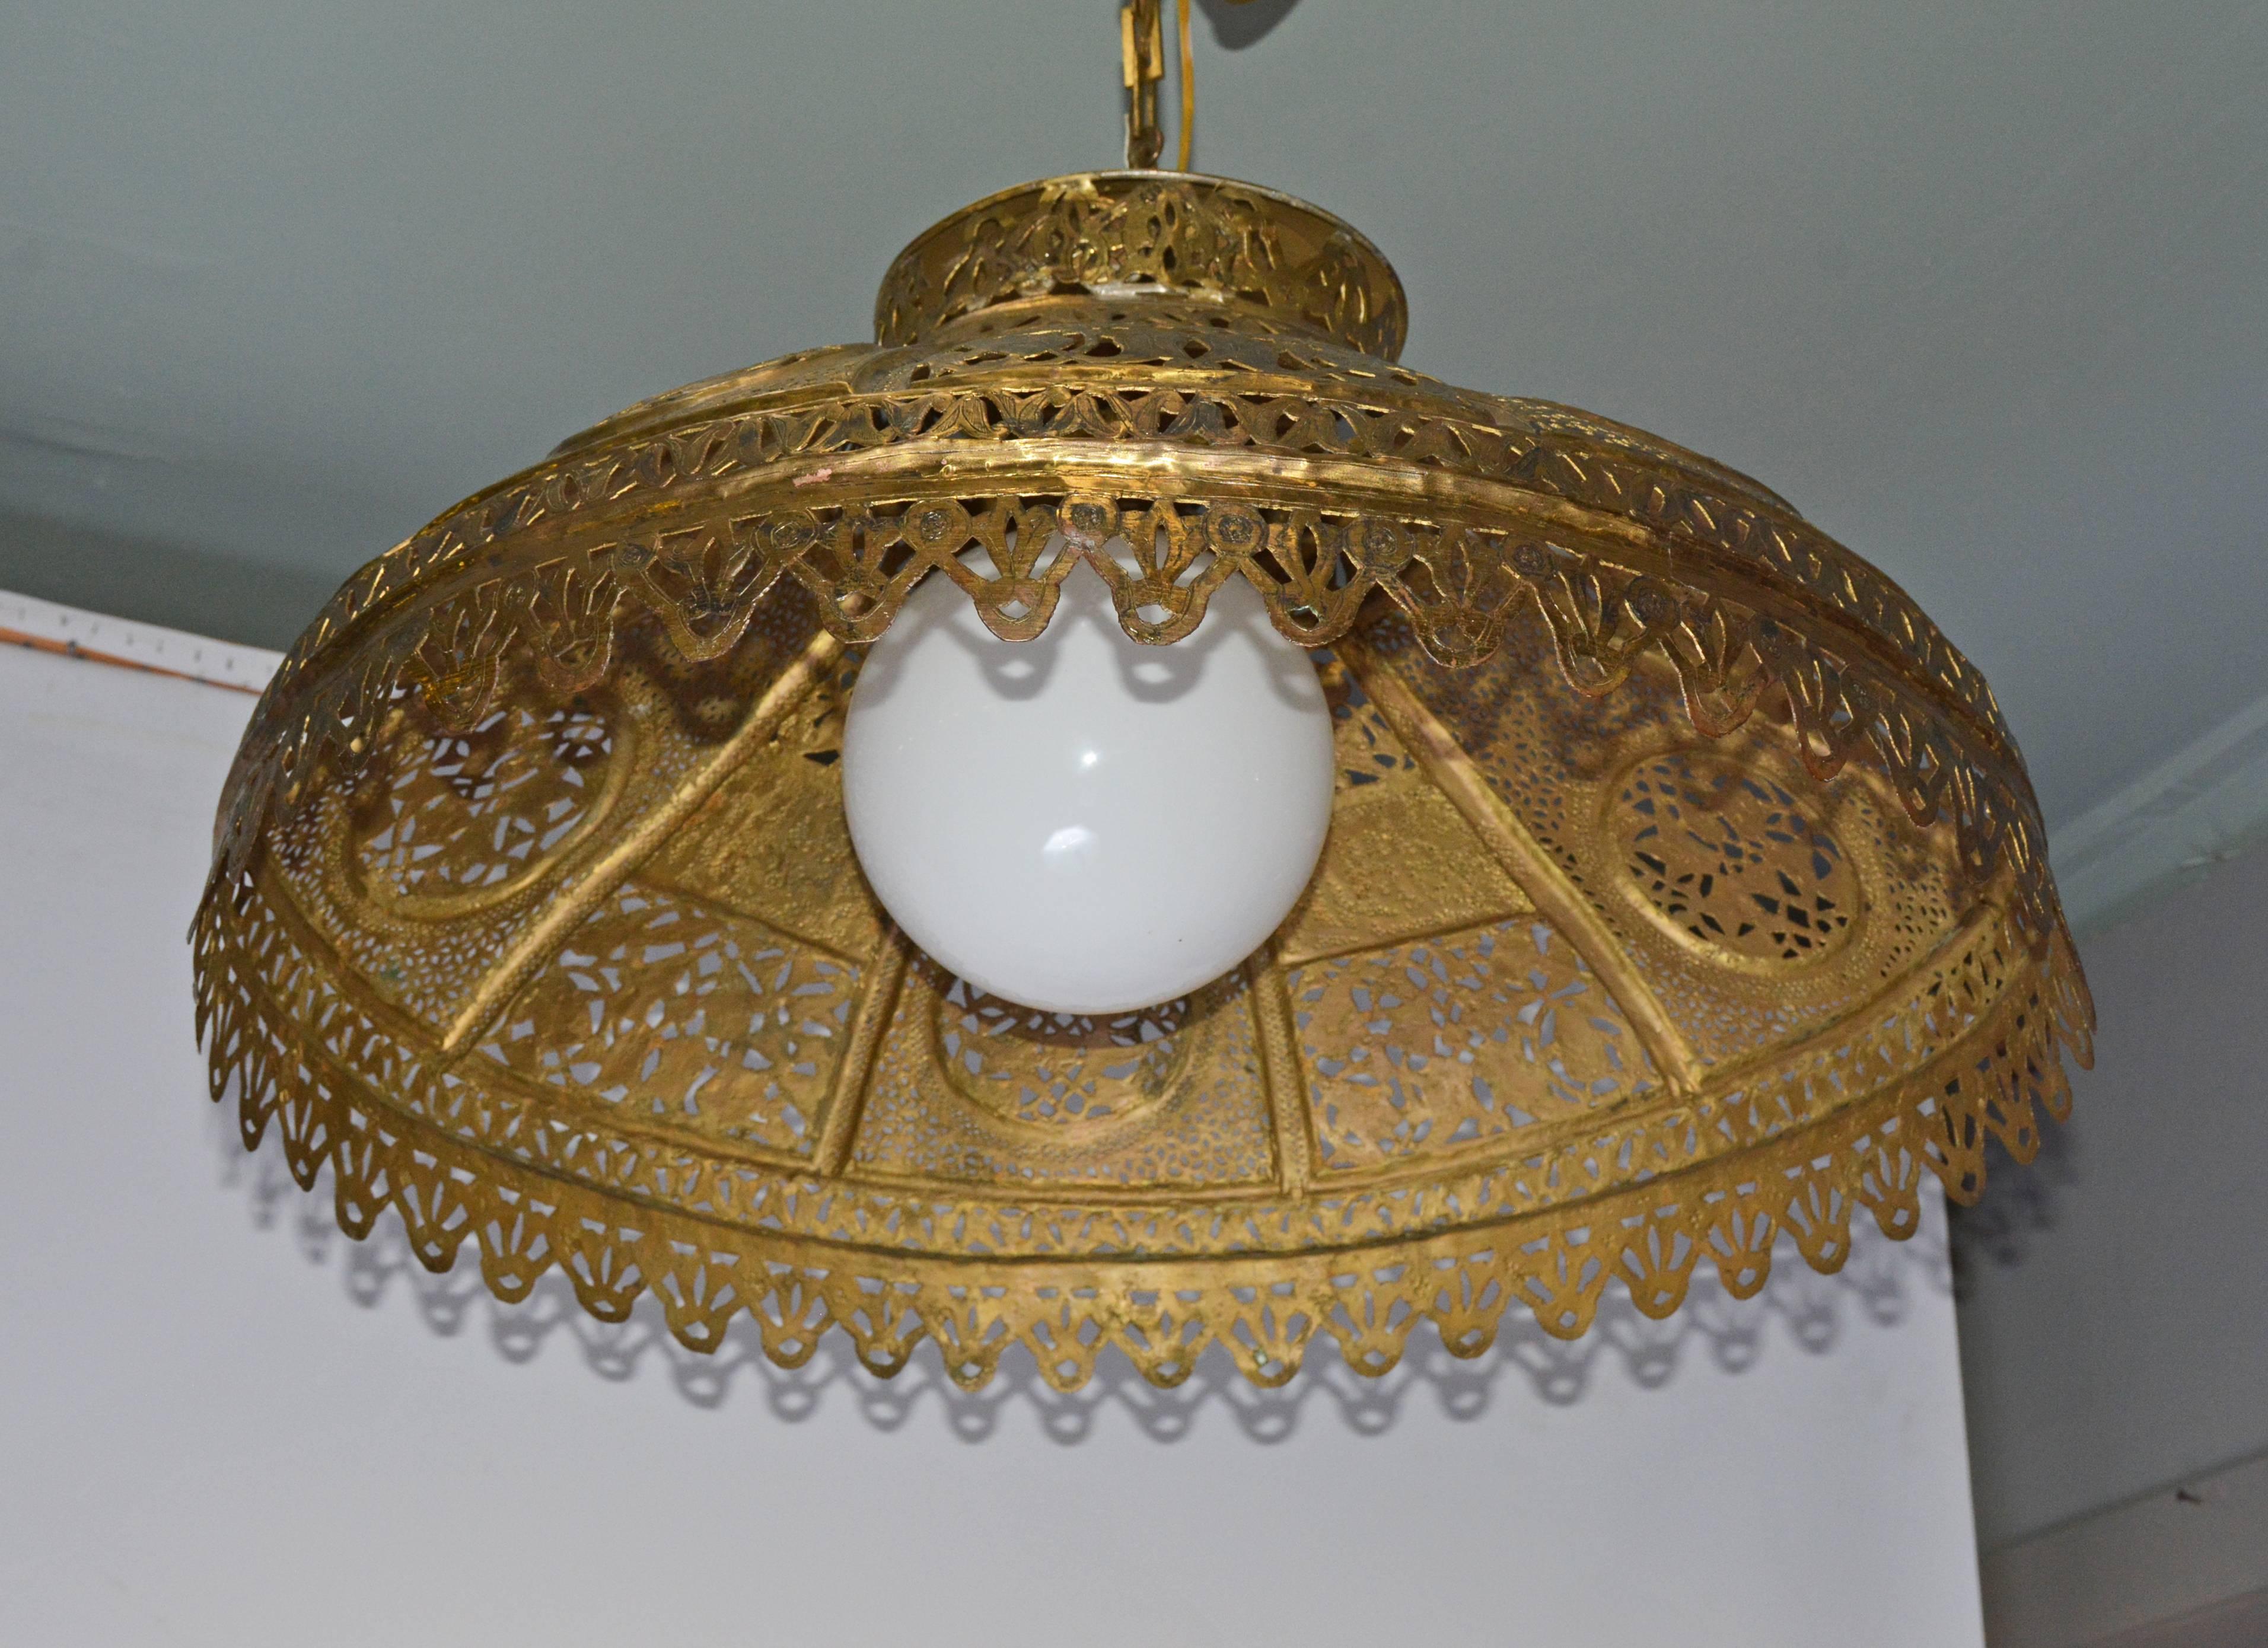 The Moorish Mideastern hanging lantern or chandelier is made of pierced brass decorated with leaves, fretwork and Arabic lettering and has been electrified for US use, socket and wiring for a single bulb. The 39